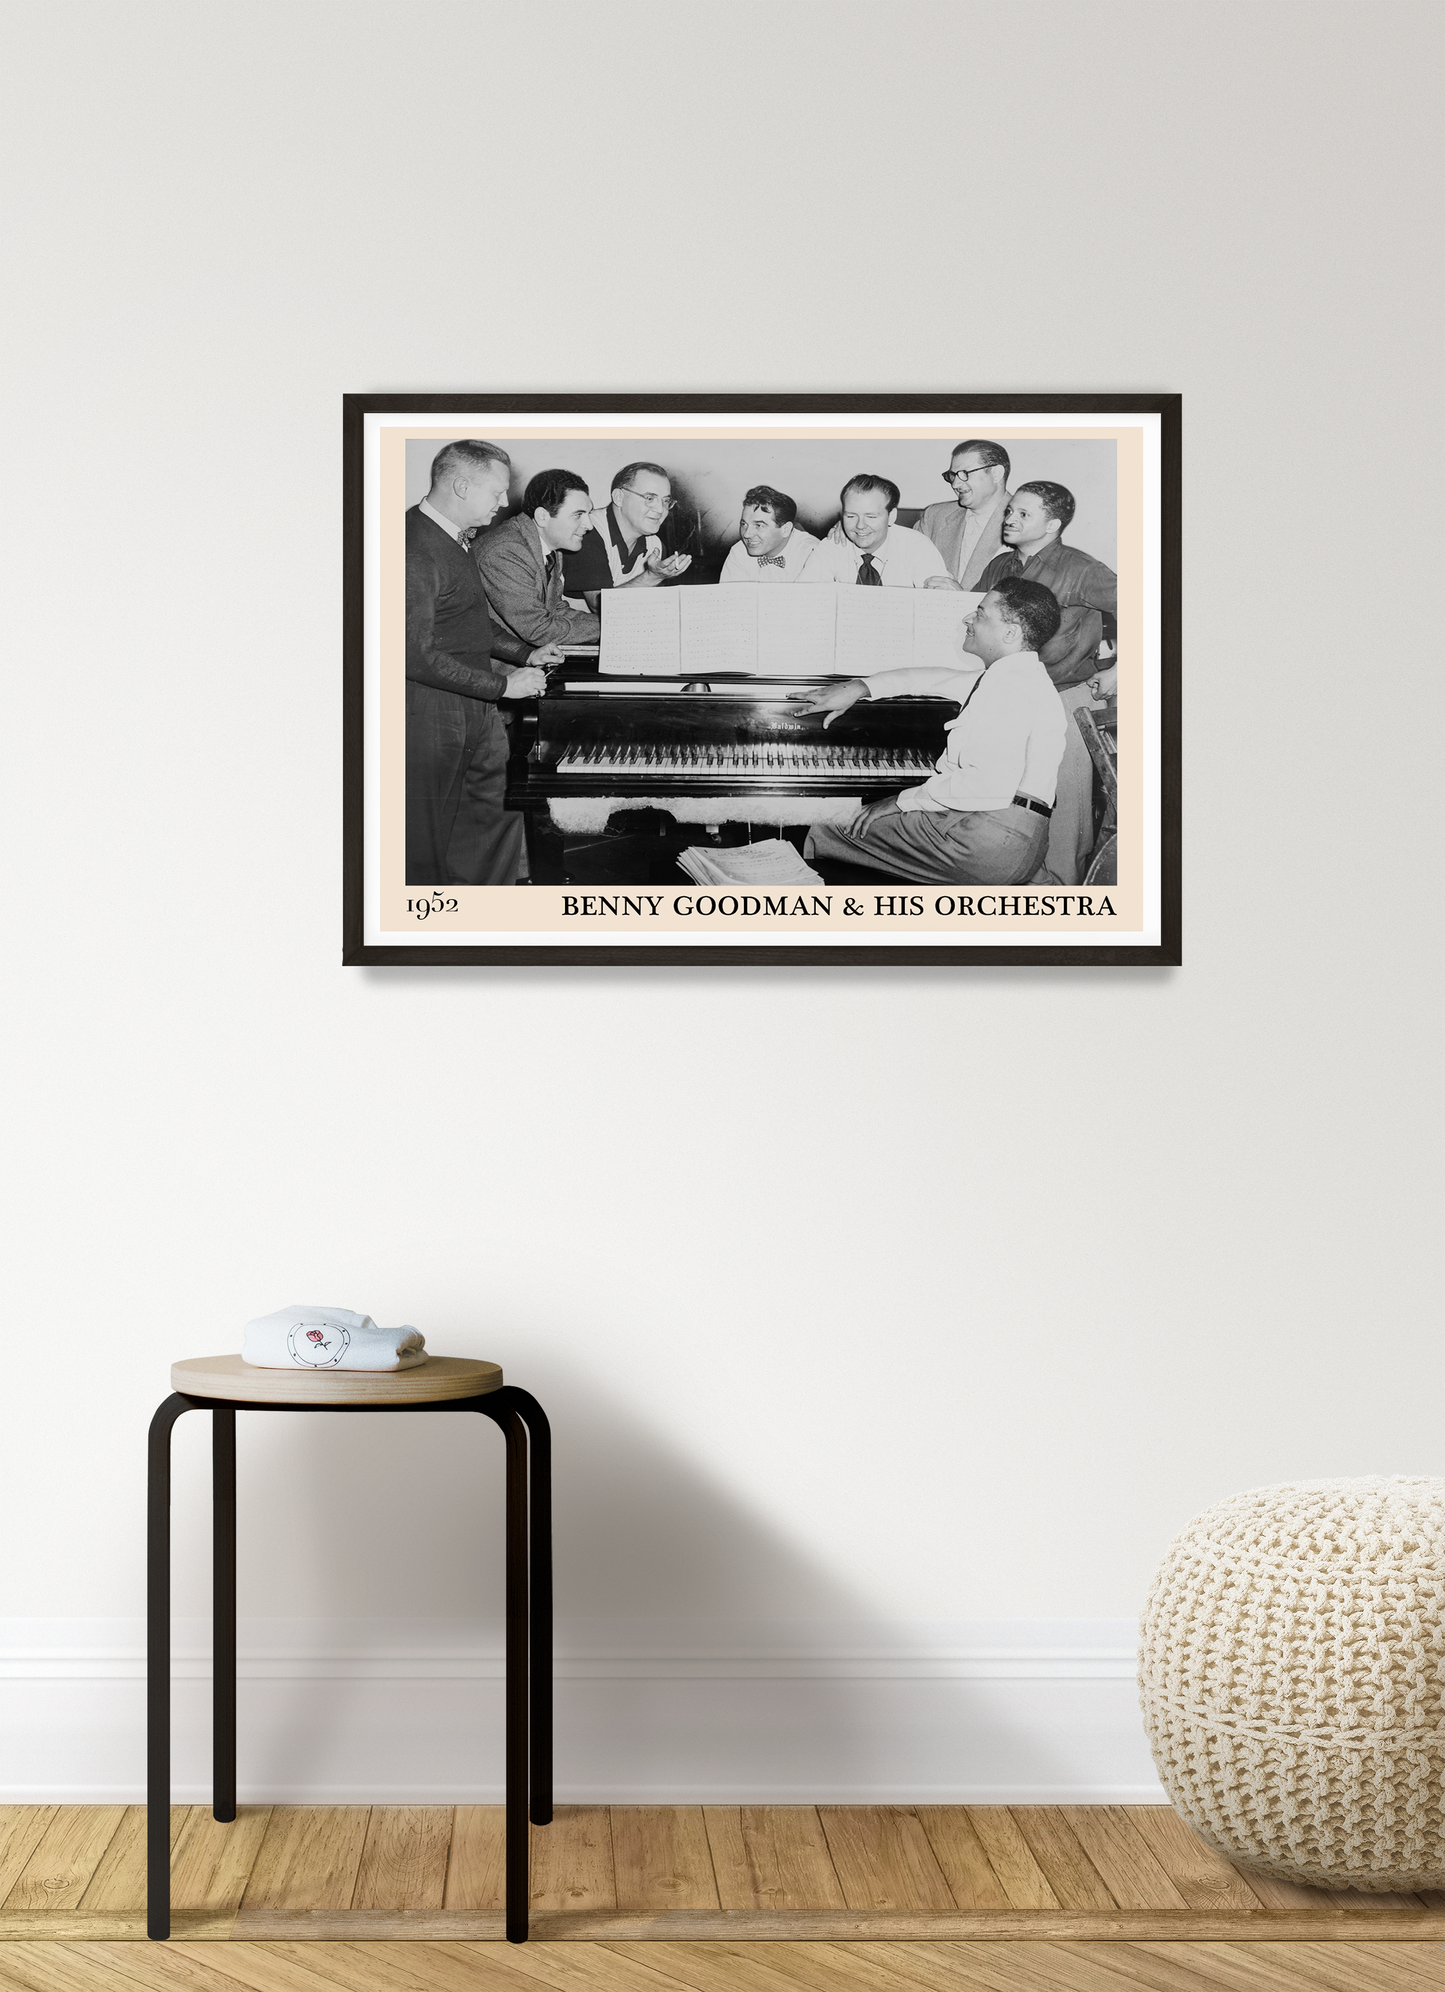 1952 photograph of Benny Goodman & his orchestra crafted into a cool black framed jazz poster. The poster is hanging on a white living room wall